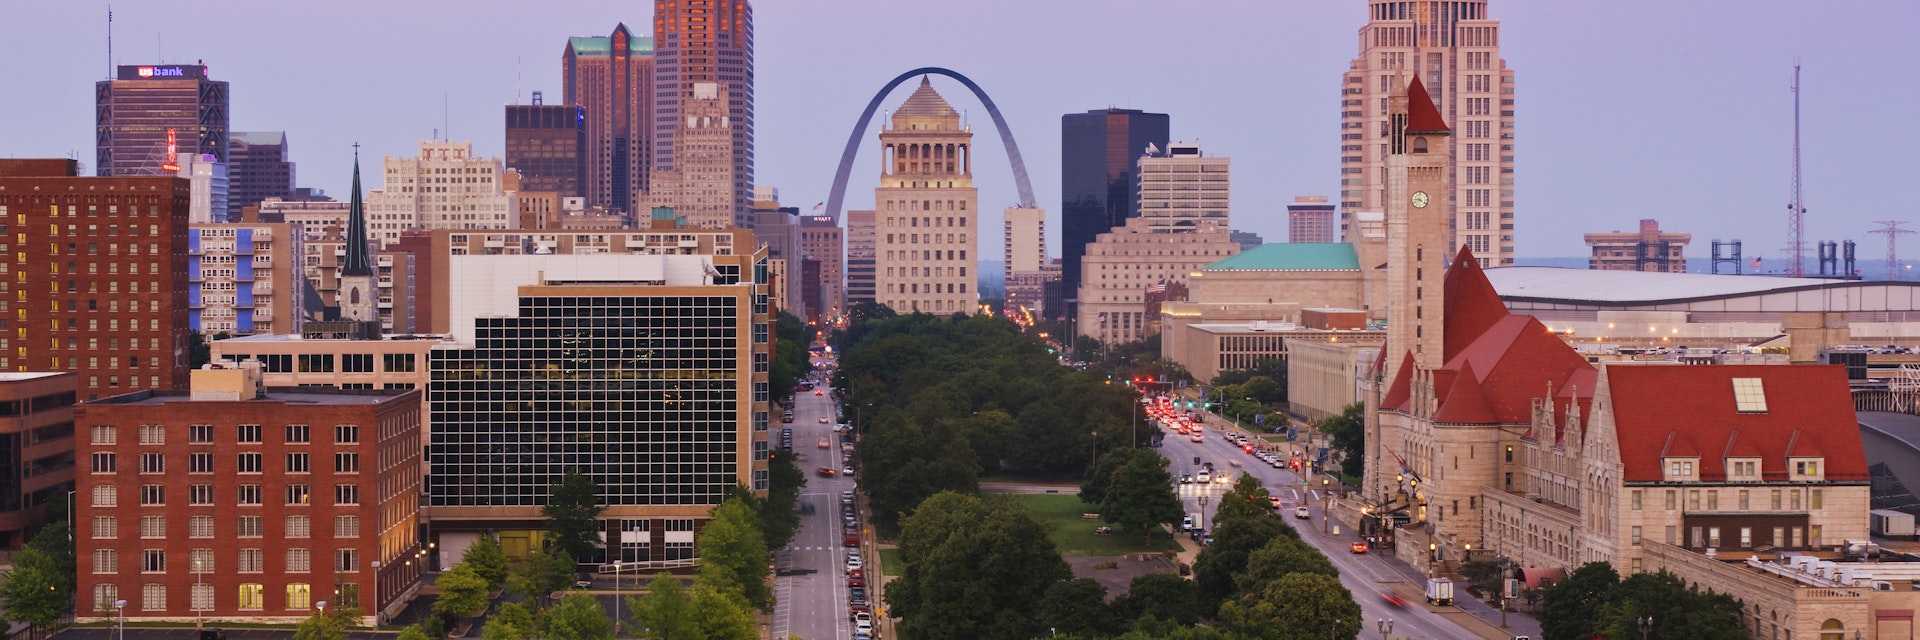 Downtown St Louis skyline at dusk, featuring the Gateway Arch.